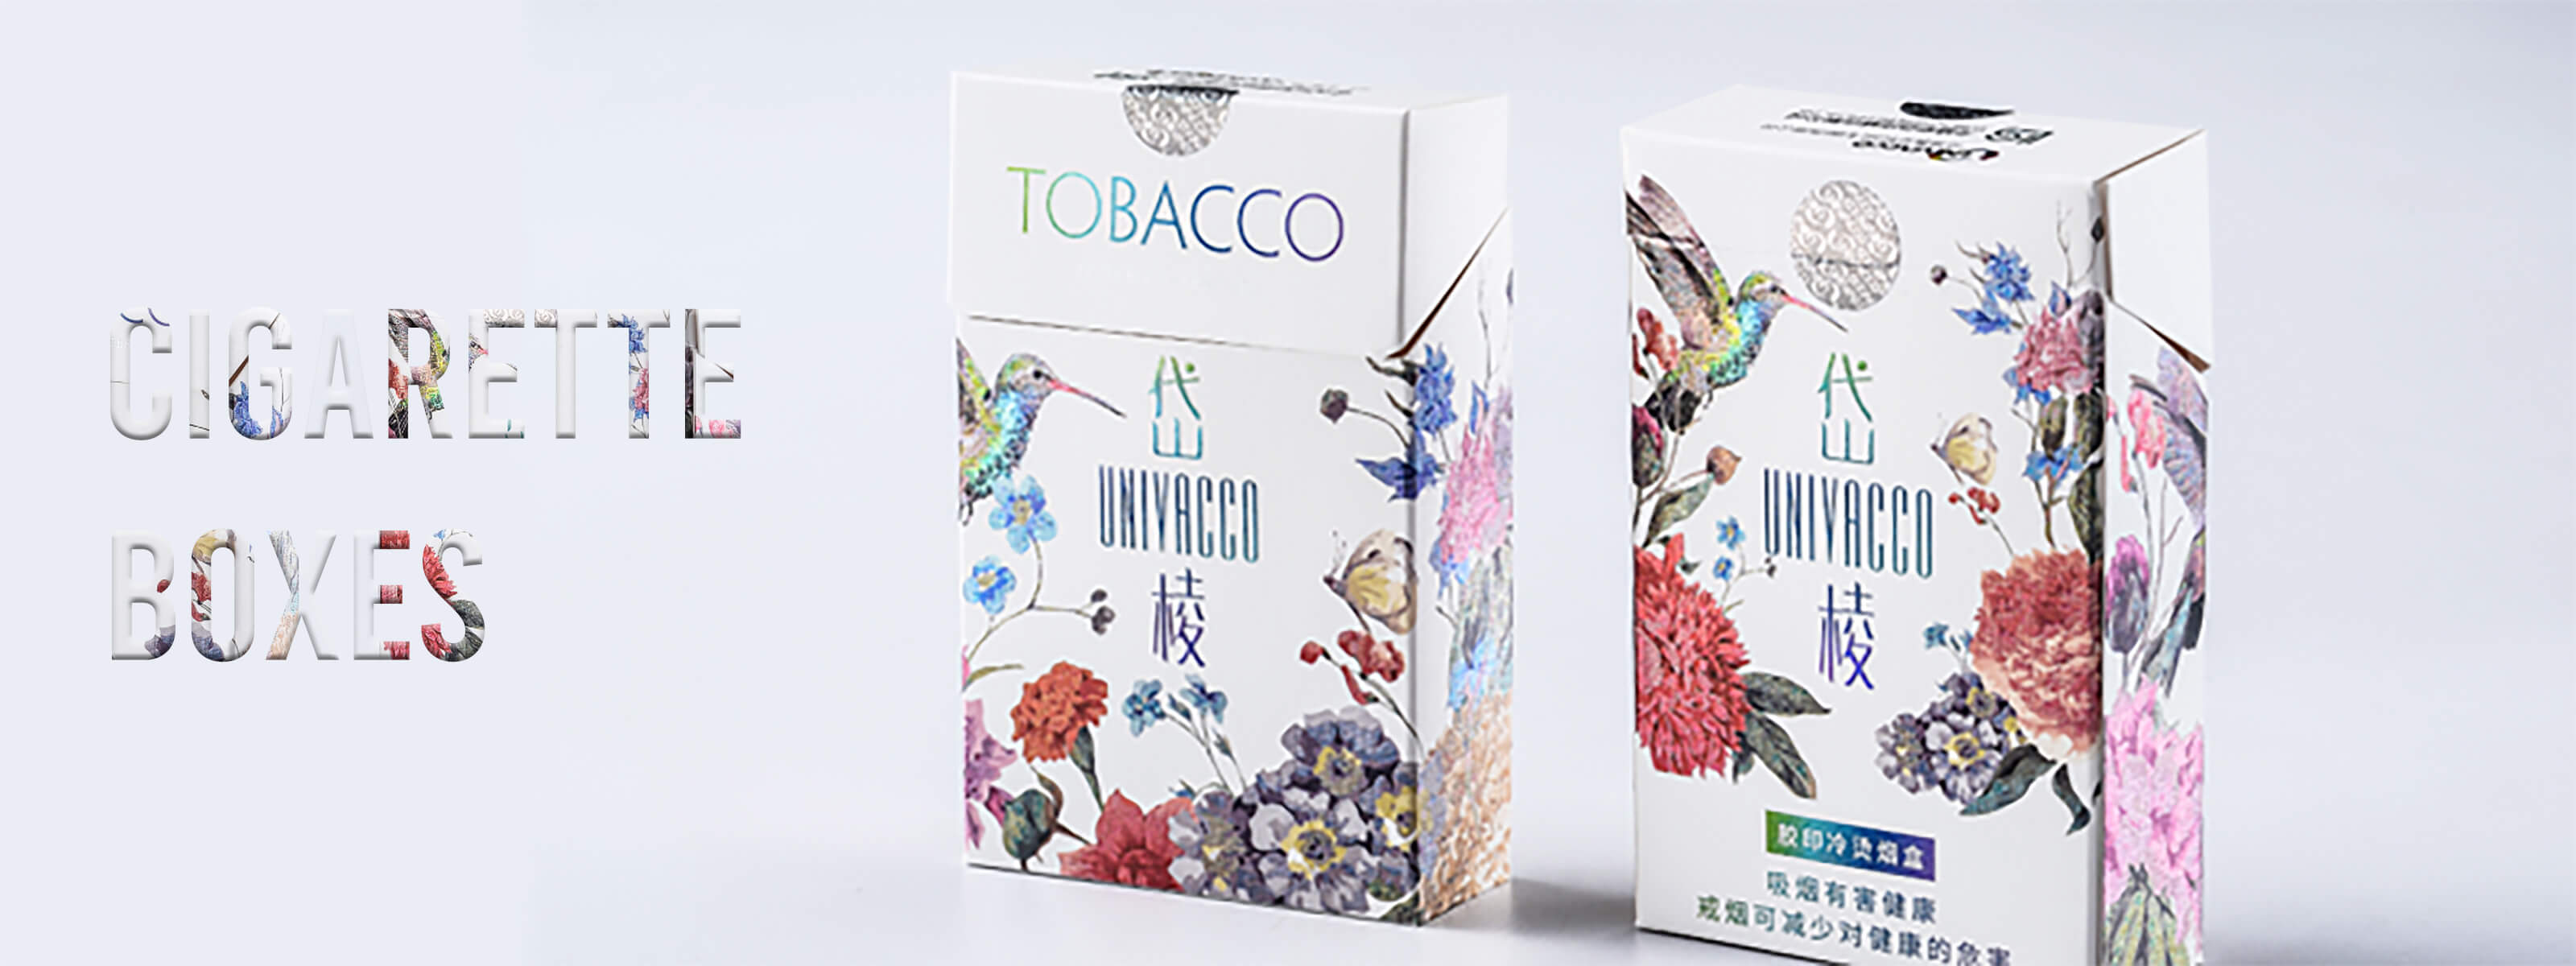 Importance of Customized Cigarette Boxes to attract Smokers